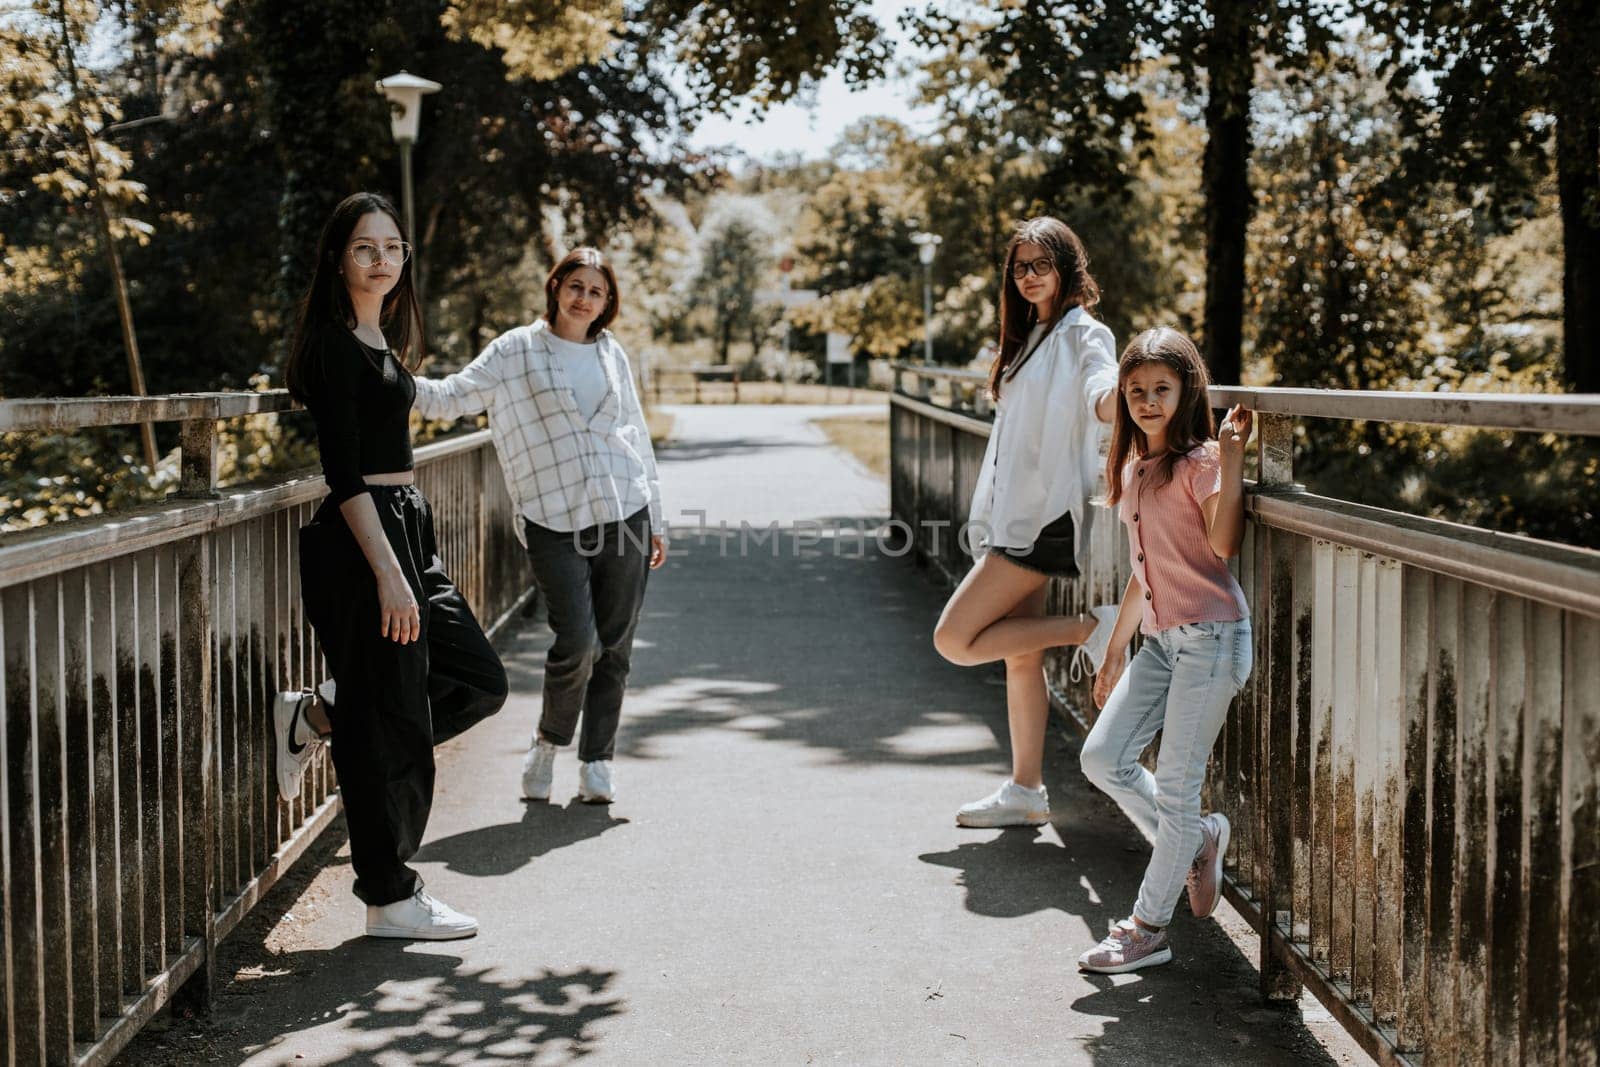 Portrait of a young Caucasian mother with three grown daughters standing on an old wooden bridge in a city park on a summer day.